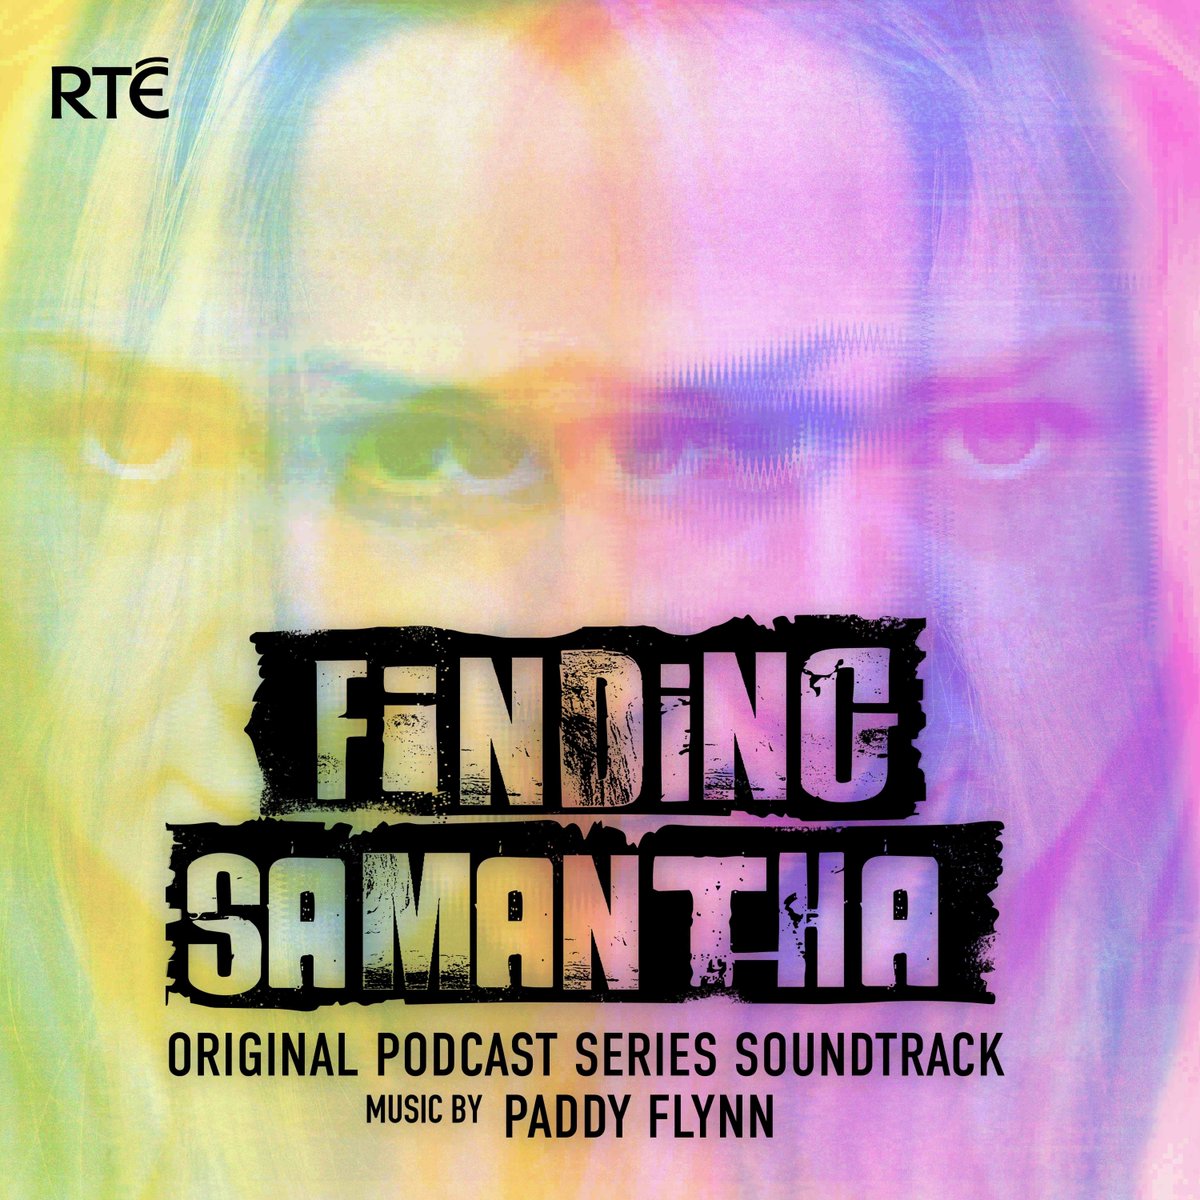 Following our first album release with the original soundtrack to #RunawayJoe we're now following up with our second album from our award winning series #FindingSamantha Beautifully written and performed by Paddy Flynn, listen wherever you get your music! orcd.co/findingsamantha